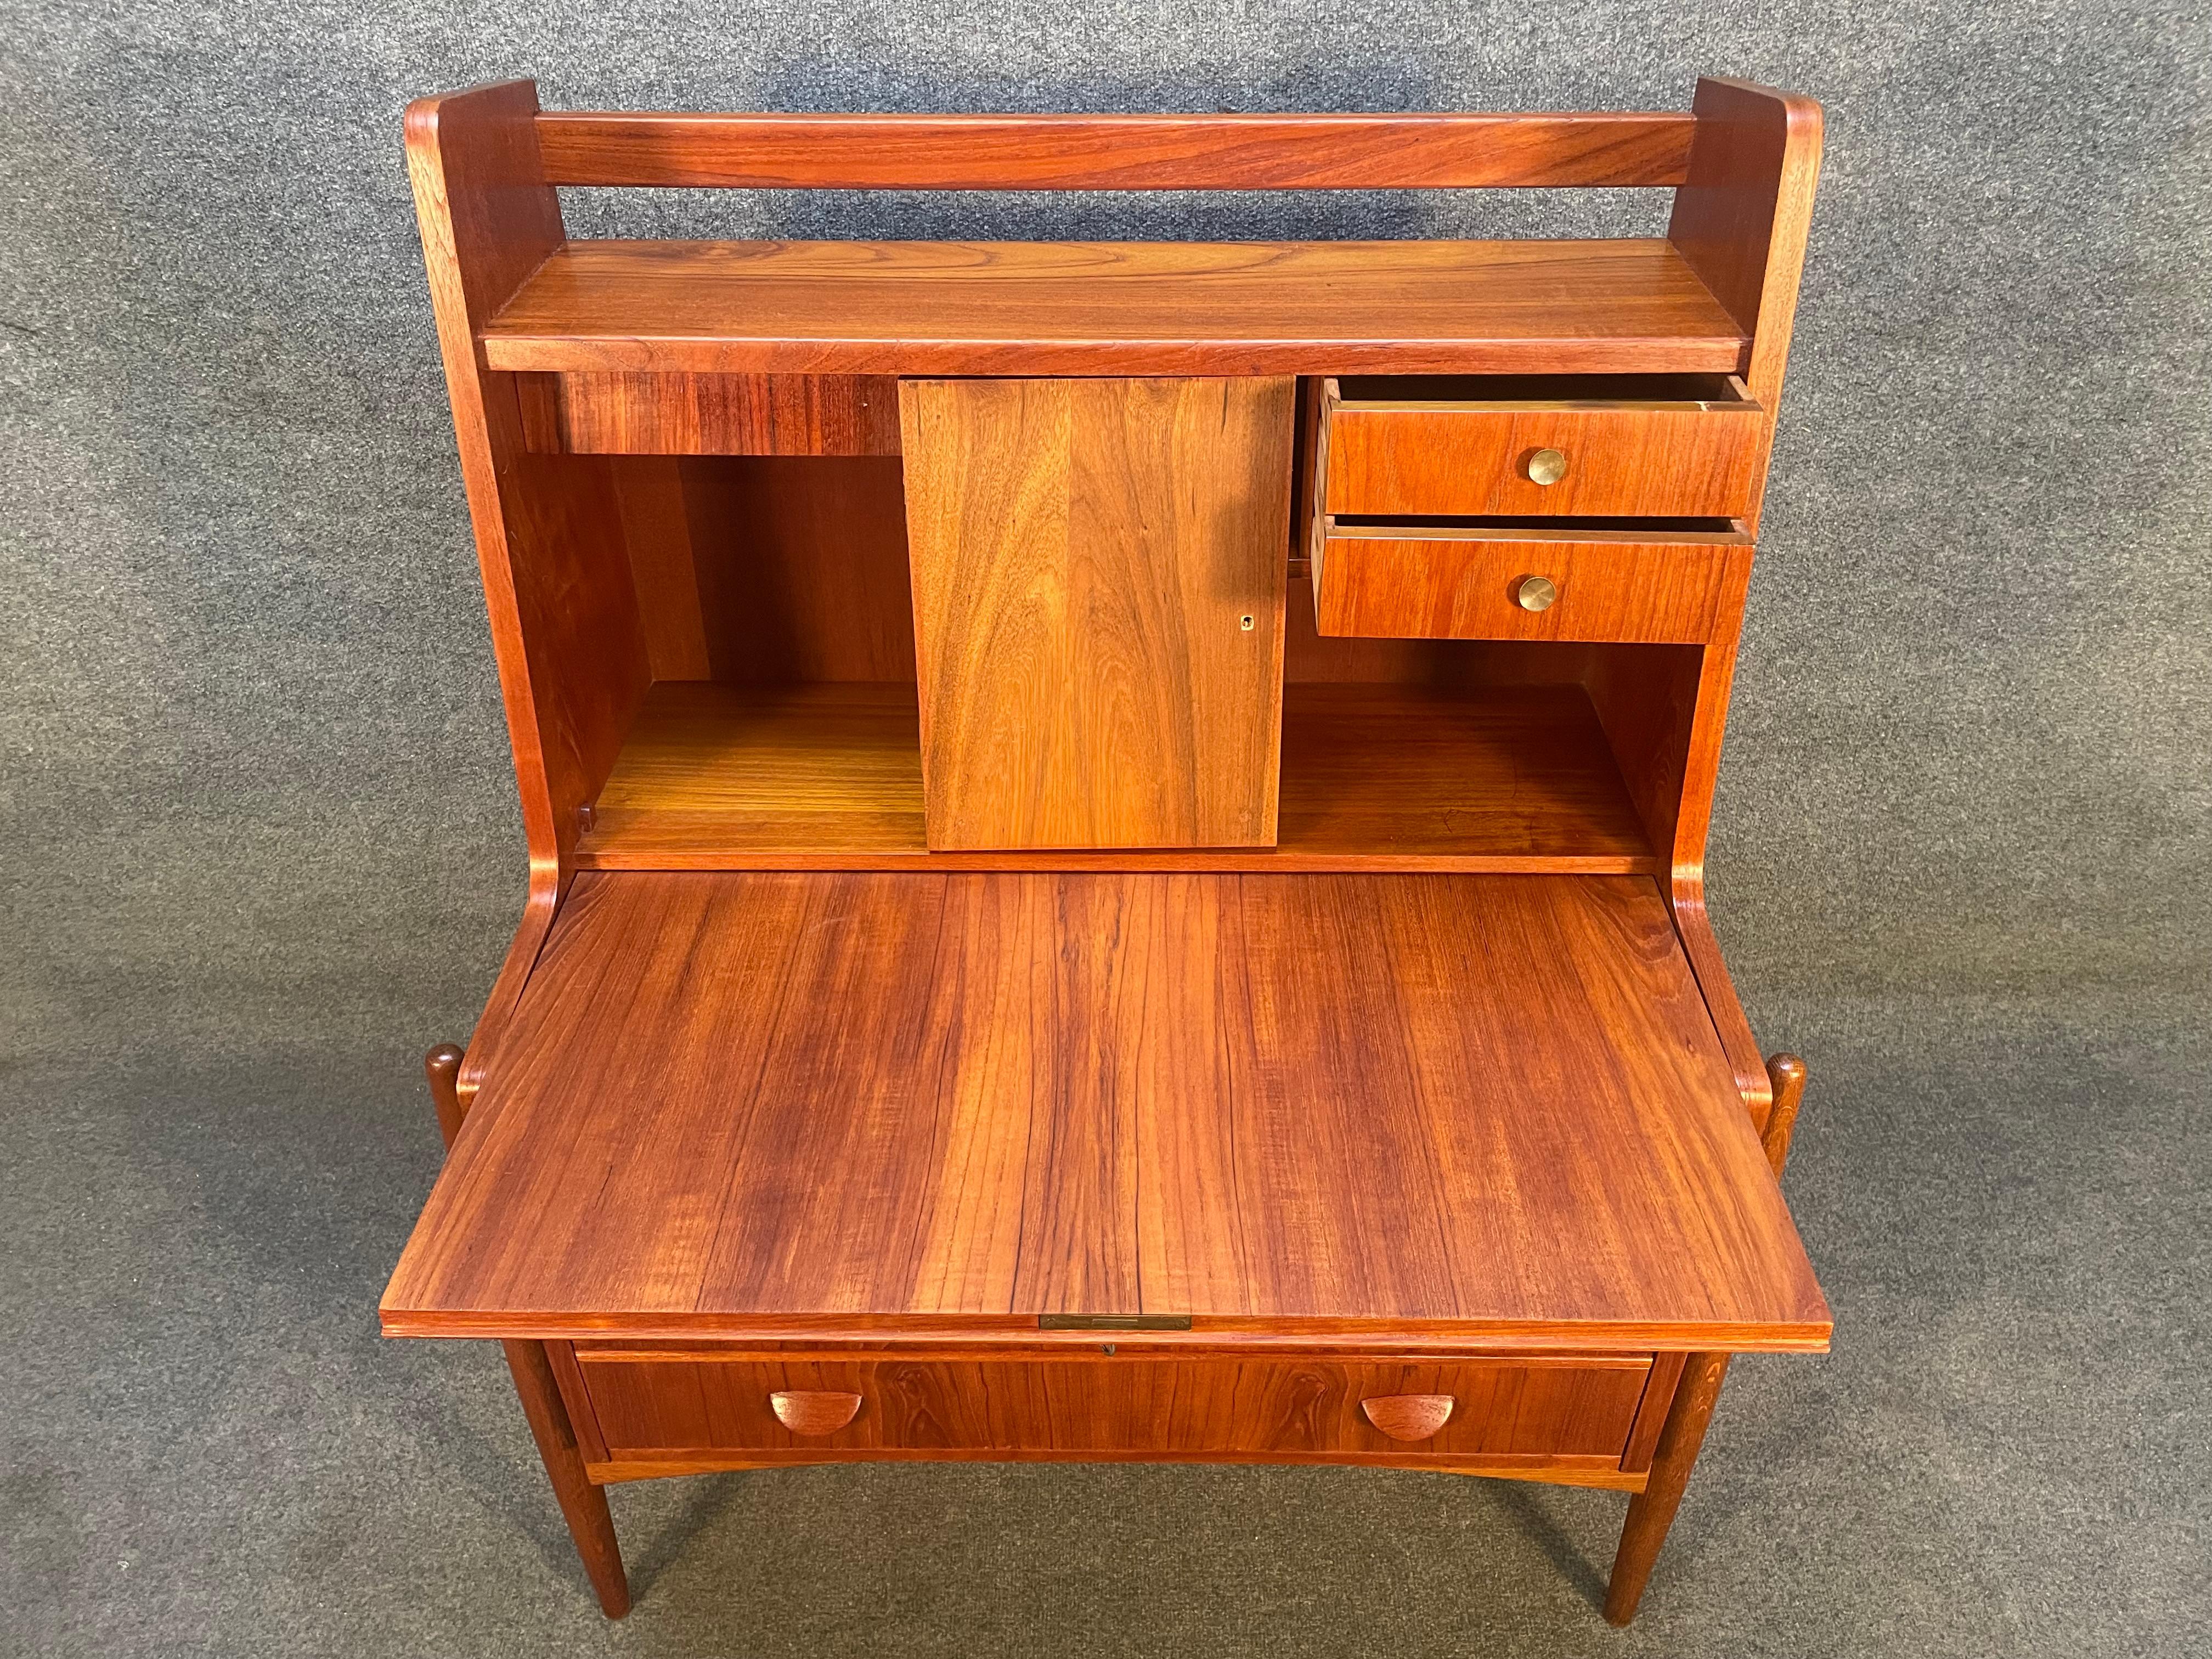 Here is terrific and rare Scandinavian Modern secretary desk in teak wood reminiscent of Johannes Andersen's design.
This special piece, recently imported from Europe to Copenhagen before its refinishing, features a vibrant wood grain, a drop down